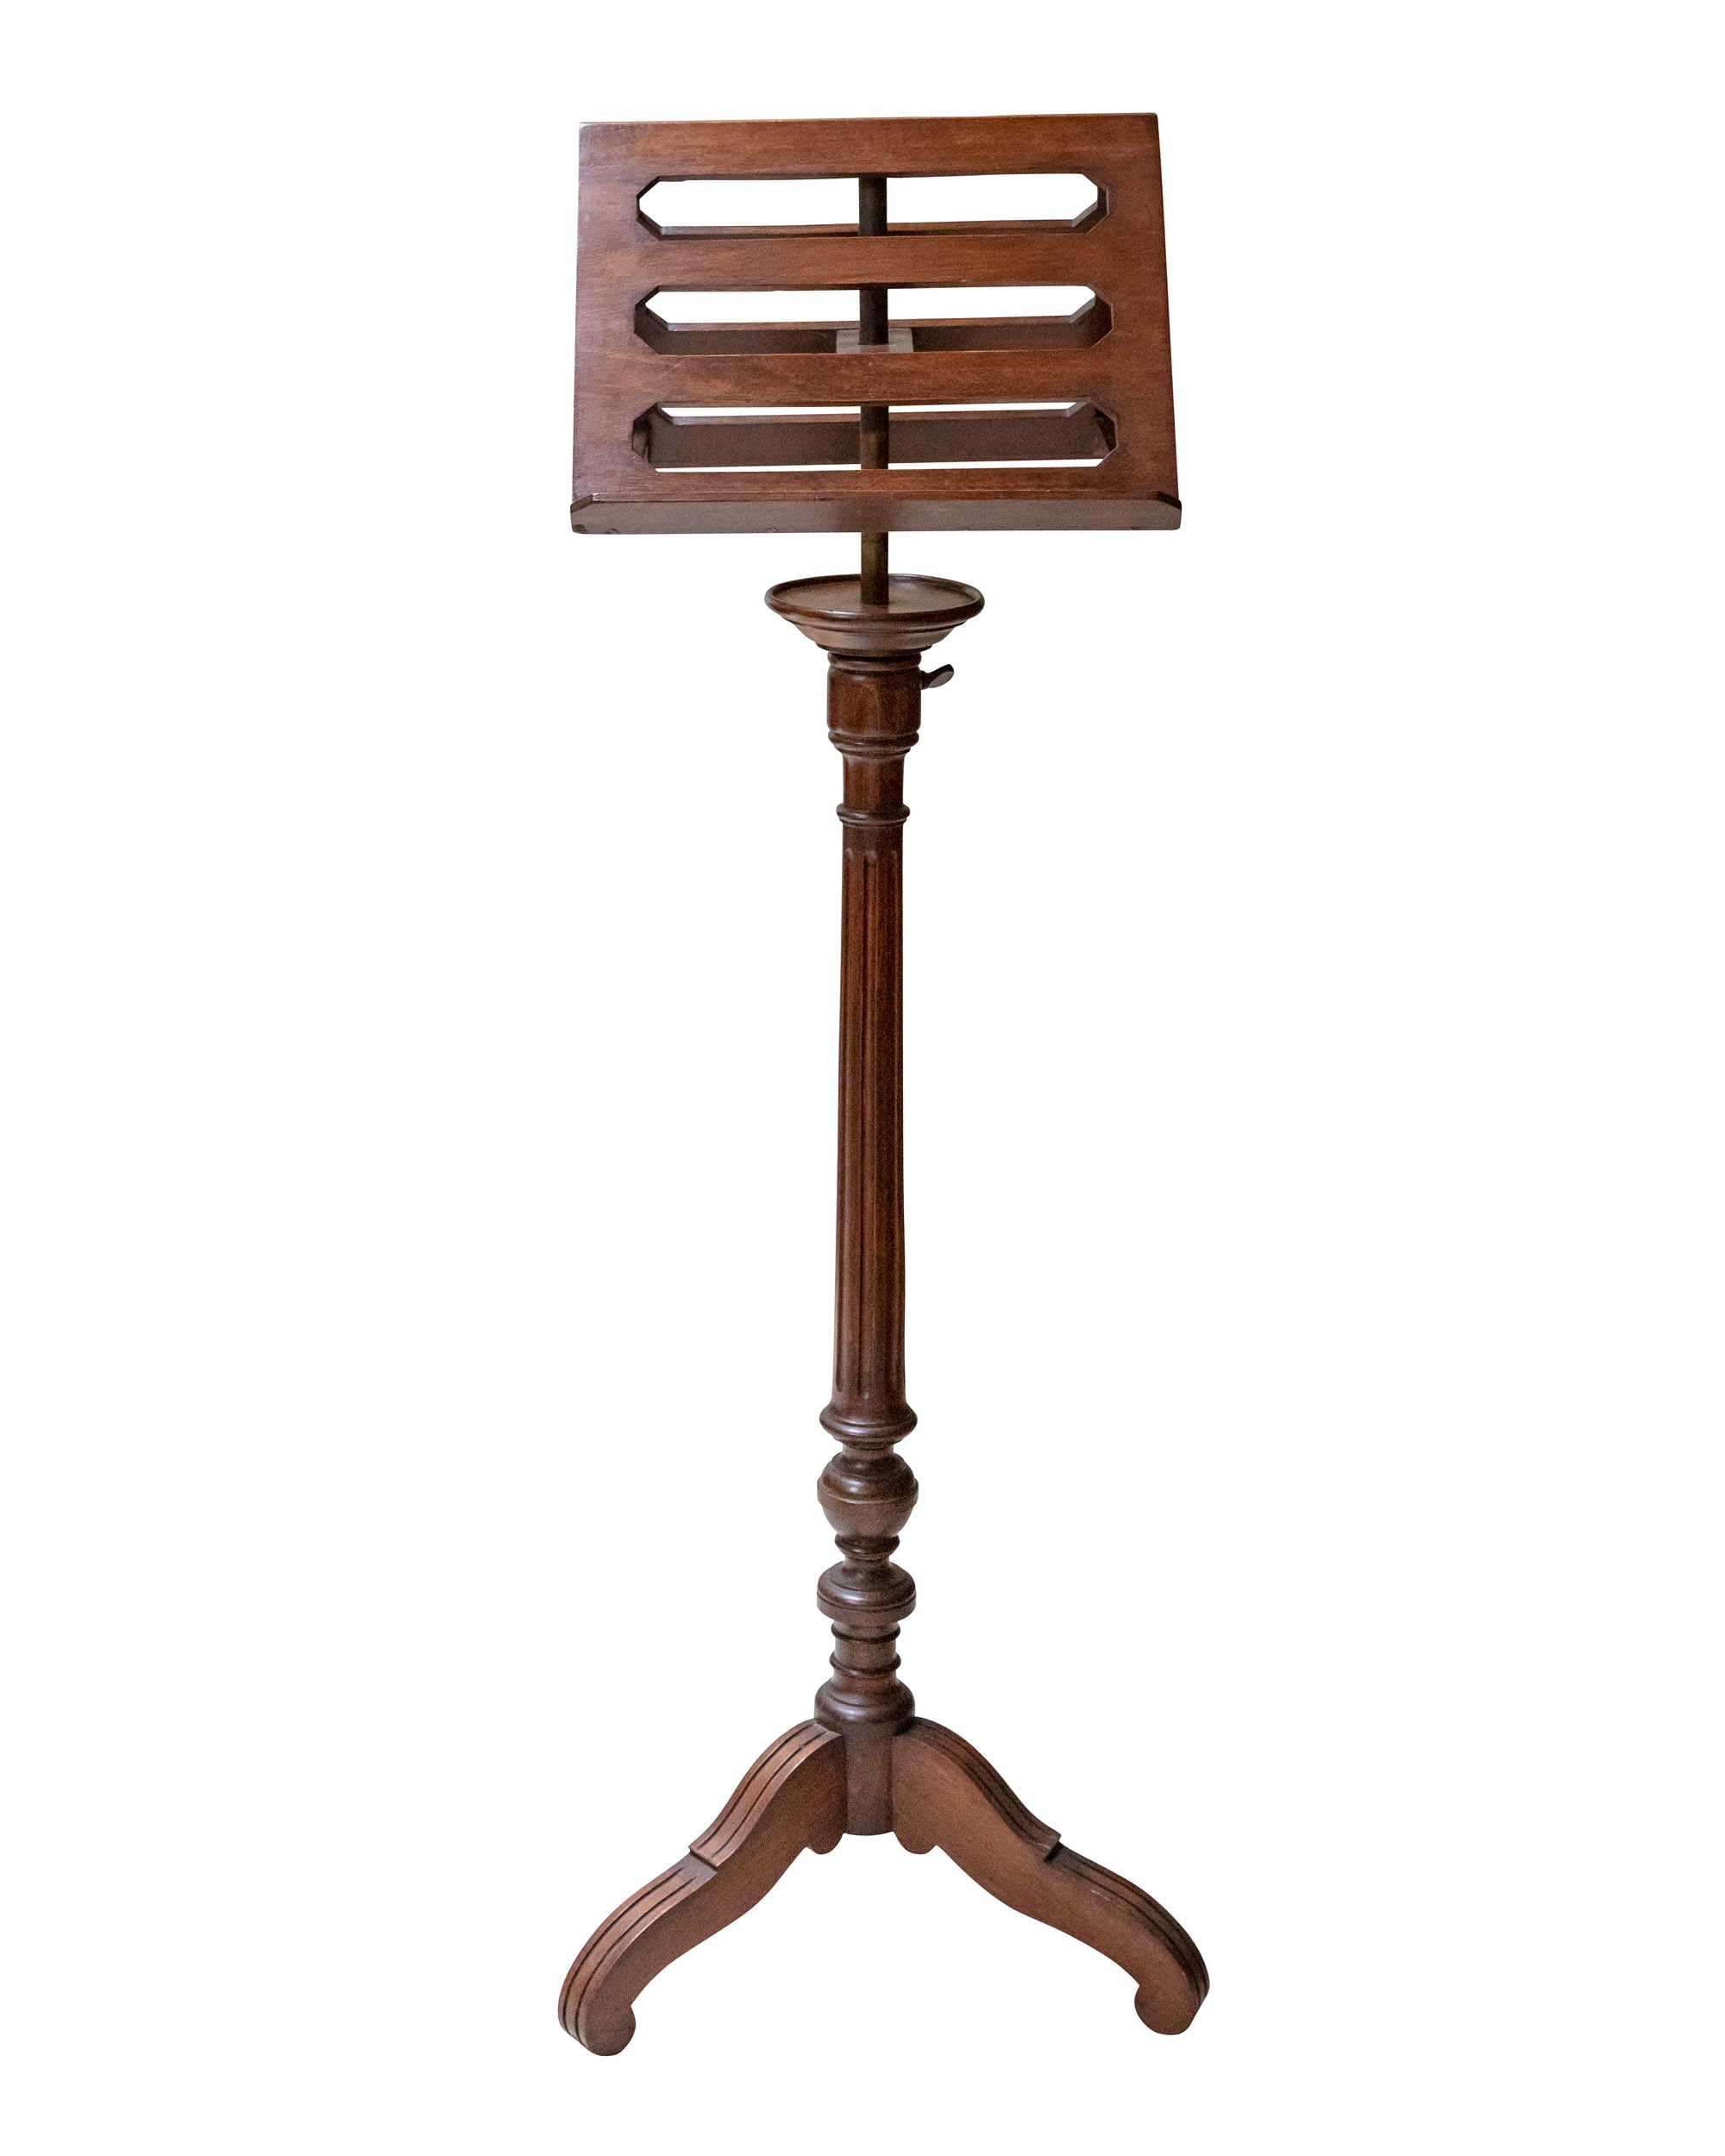 Lectern with column and a three-foot base made of hand-carved wood with wax patina